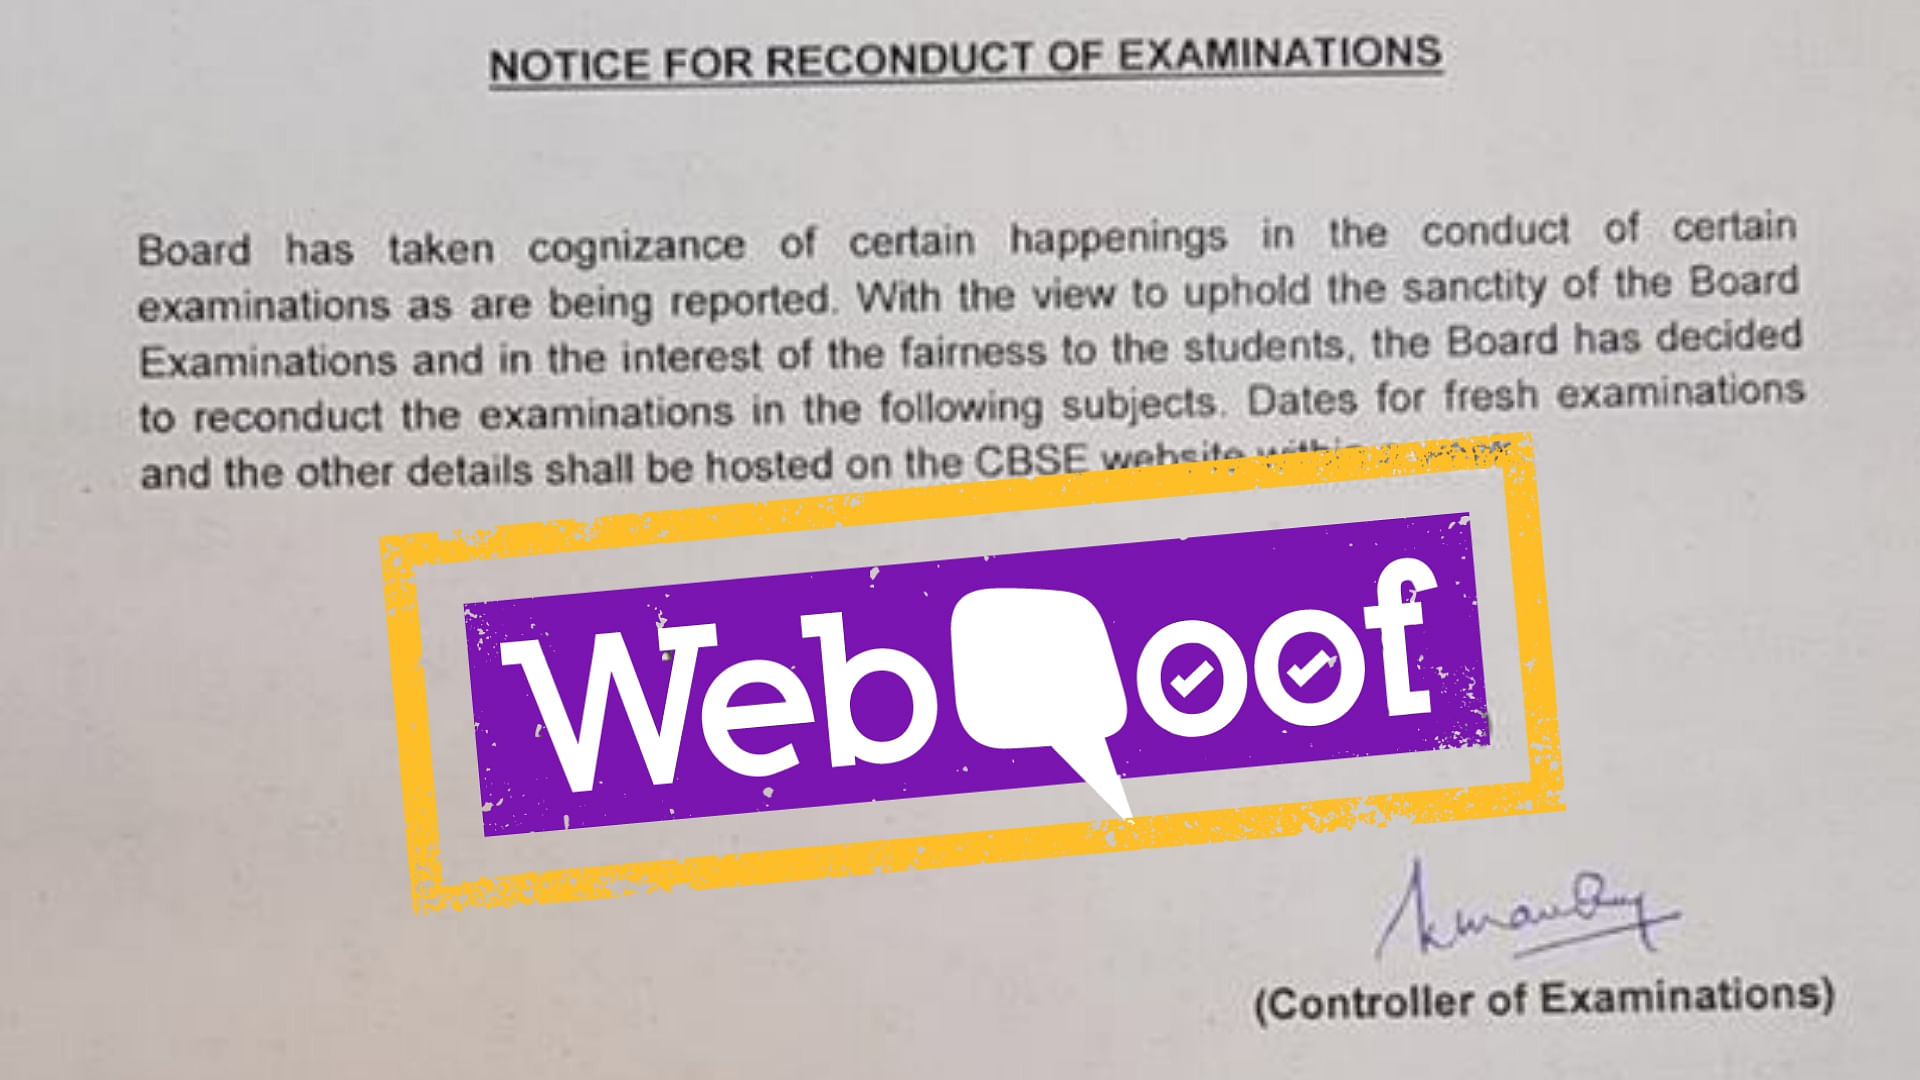 A photoshopped CBSE notice announcing the reconduct of Class 12 Board exams has been doing the rounds on WhatsApp.